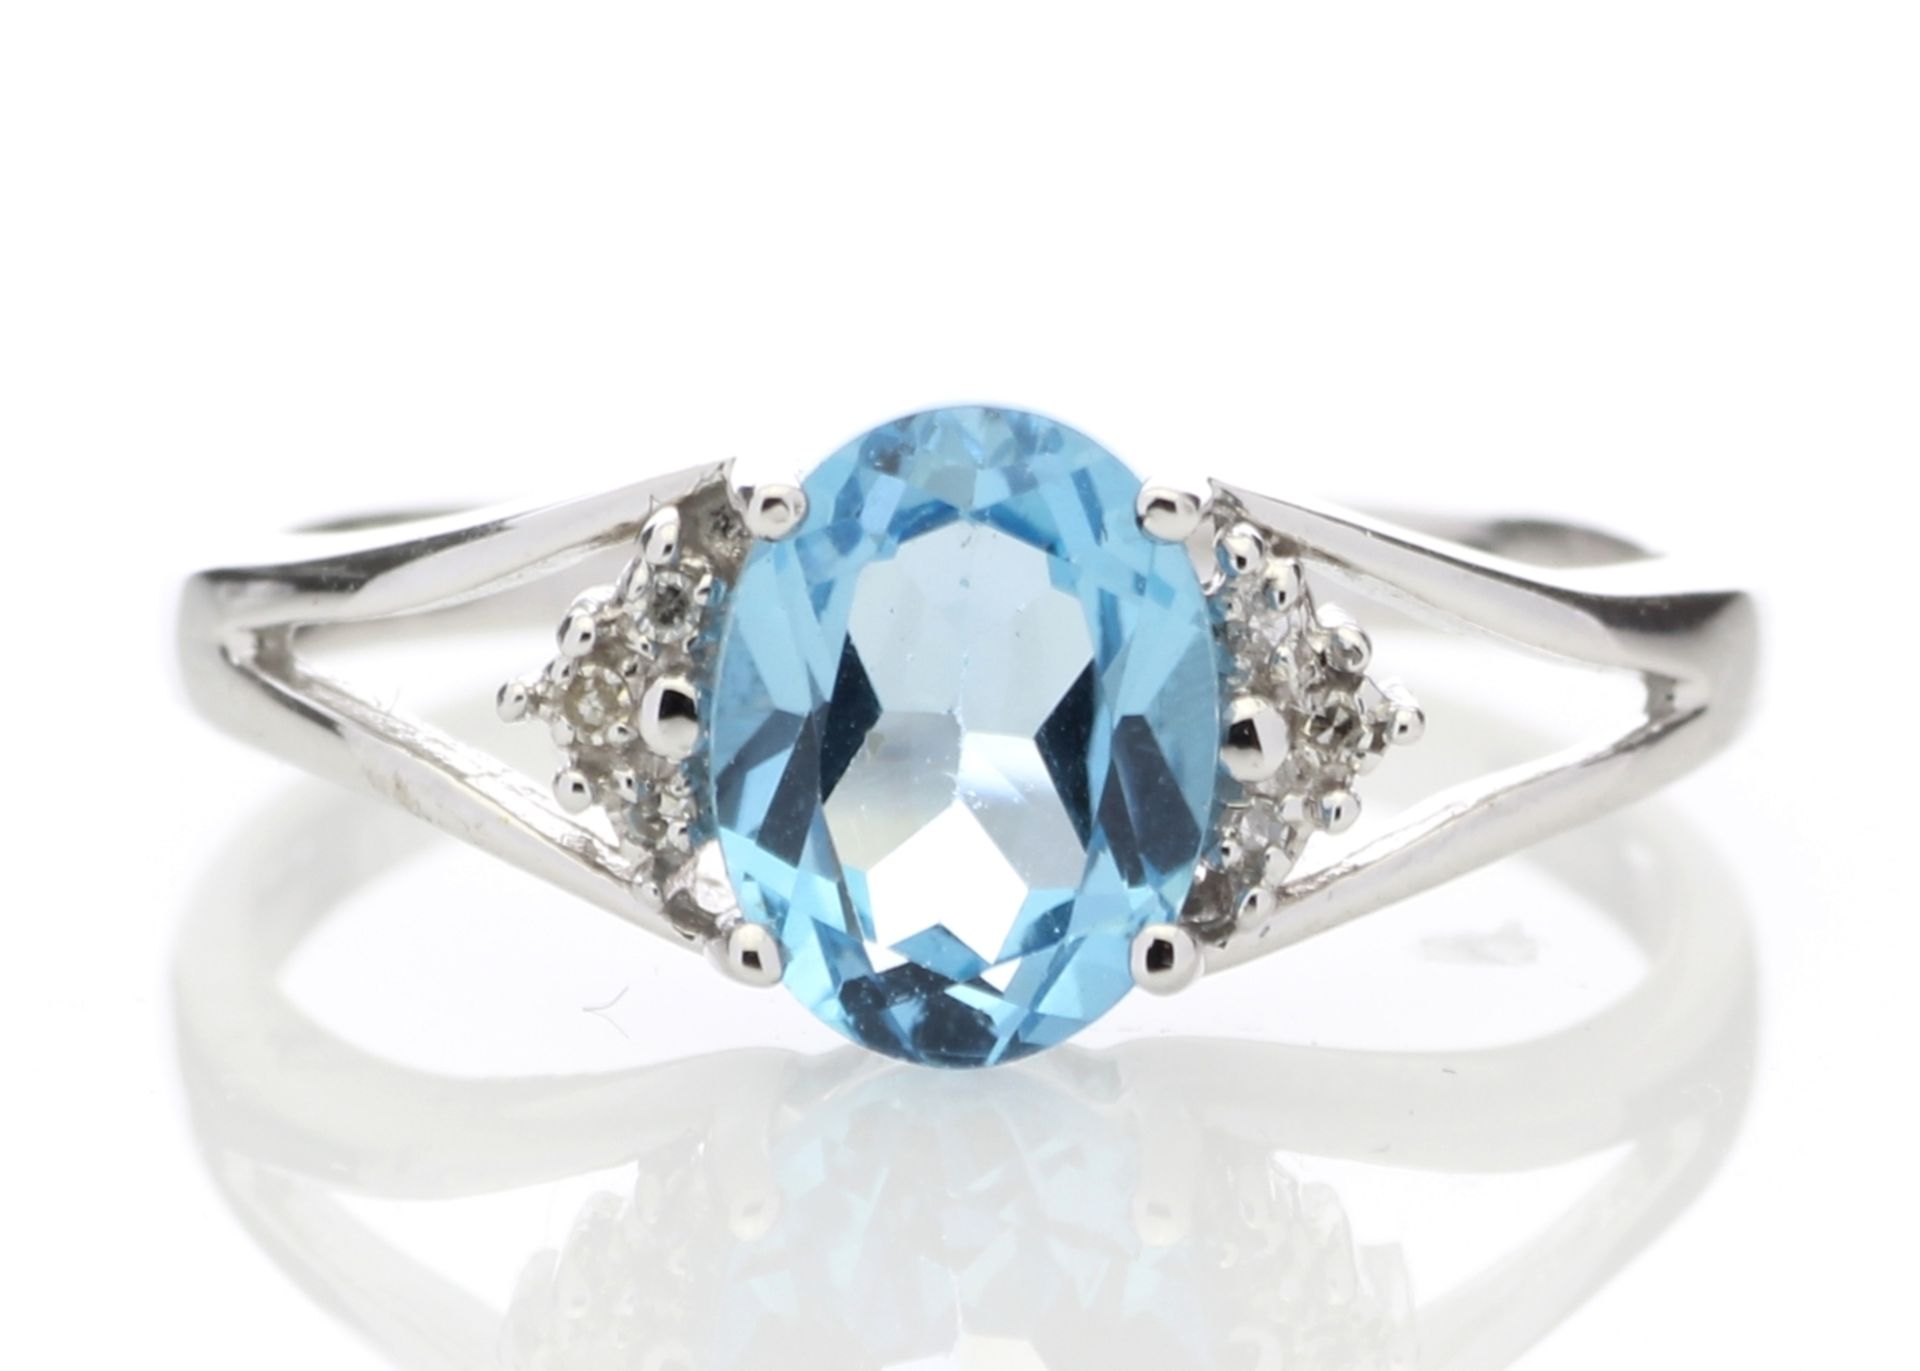 9ct White Gold Diamond And Blue Topaz Ring - Valued By GIE £4,485.00 - This stunning ring combines